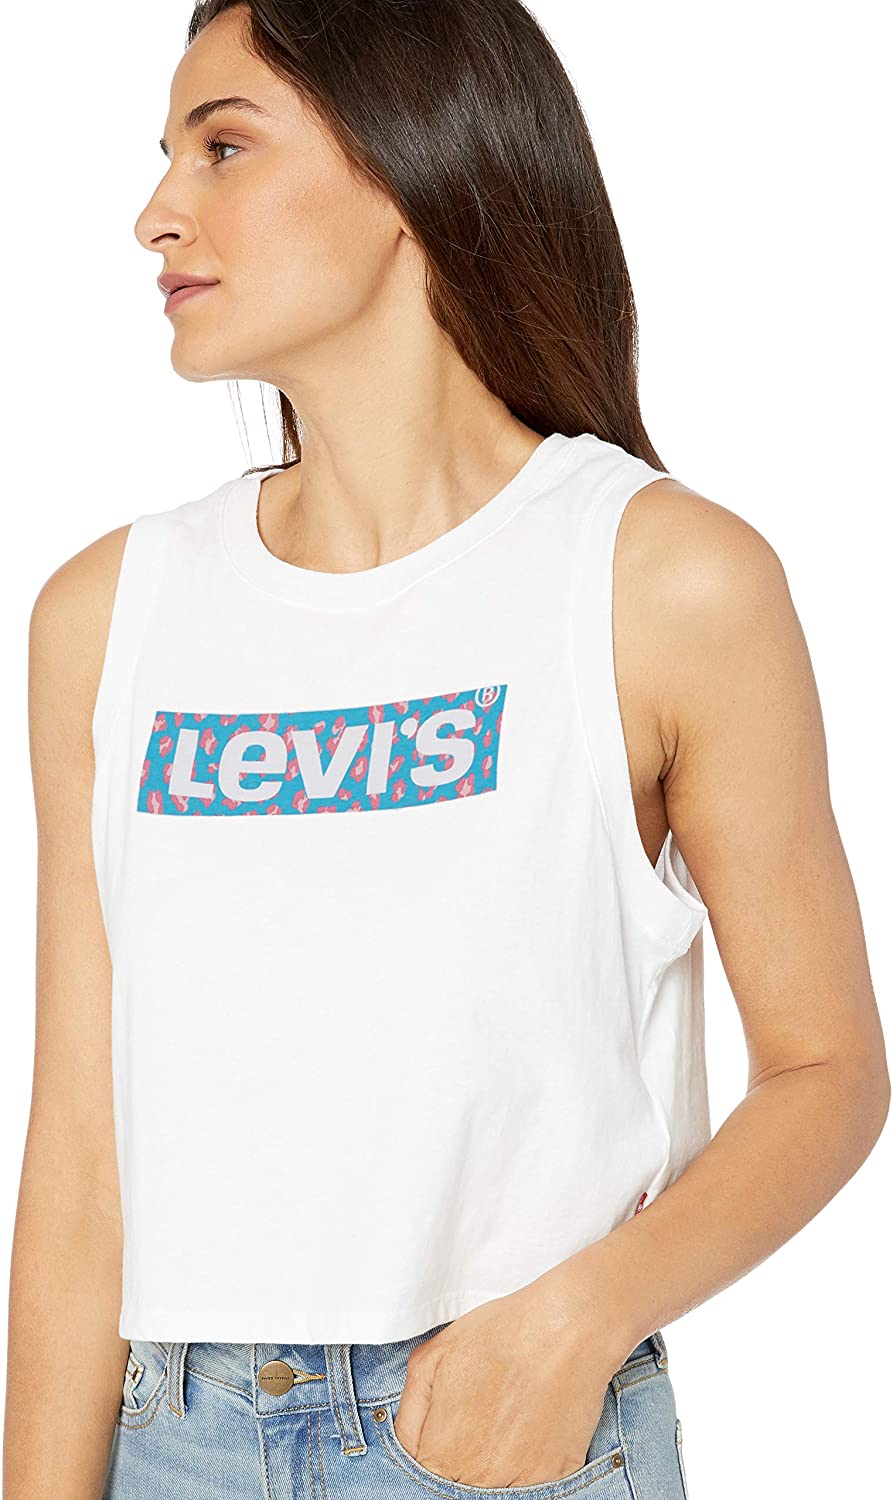 Levi'S Womens Graphic Crop Tank Top